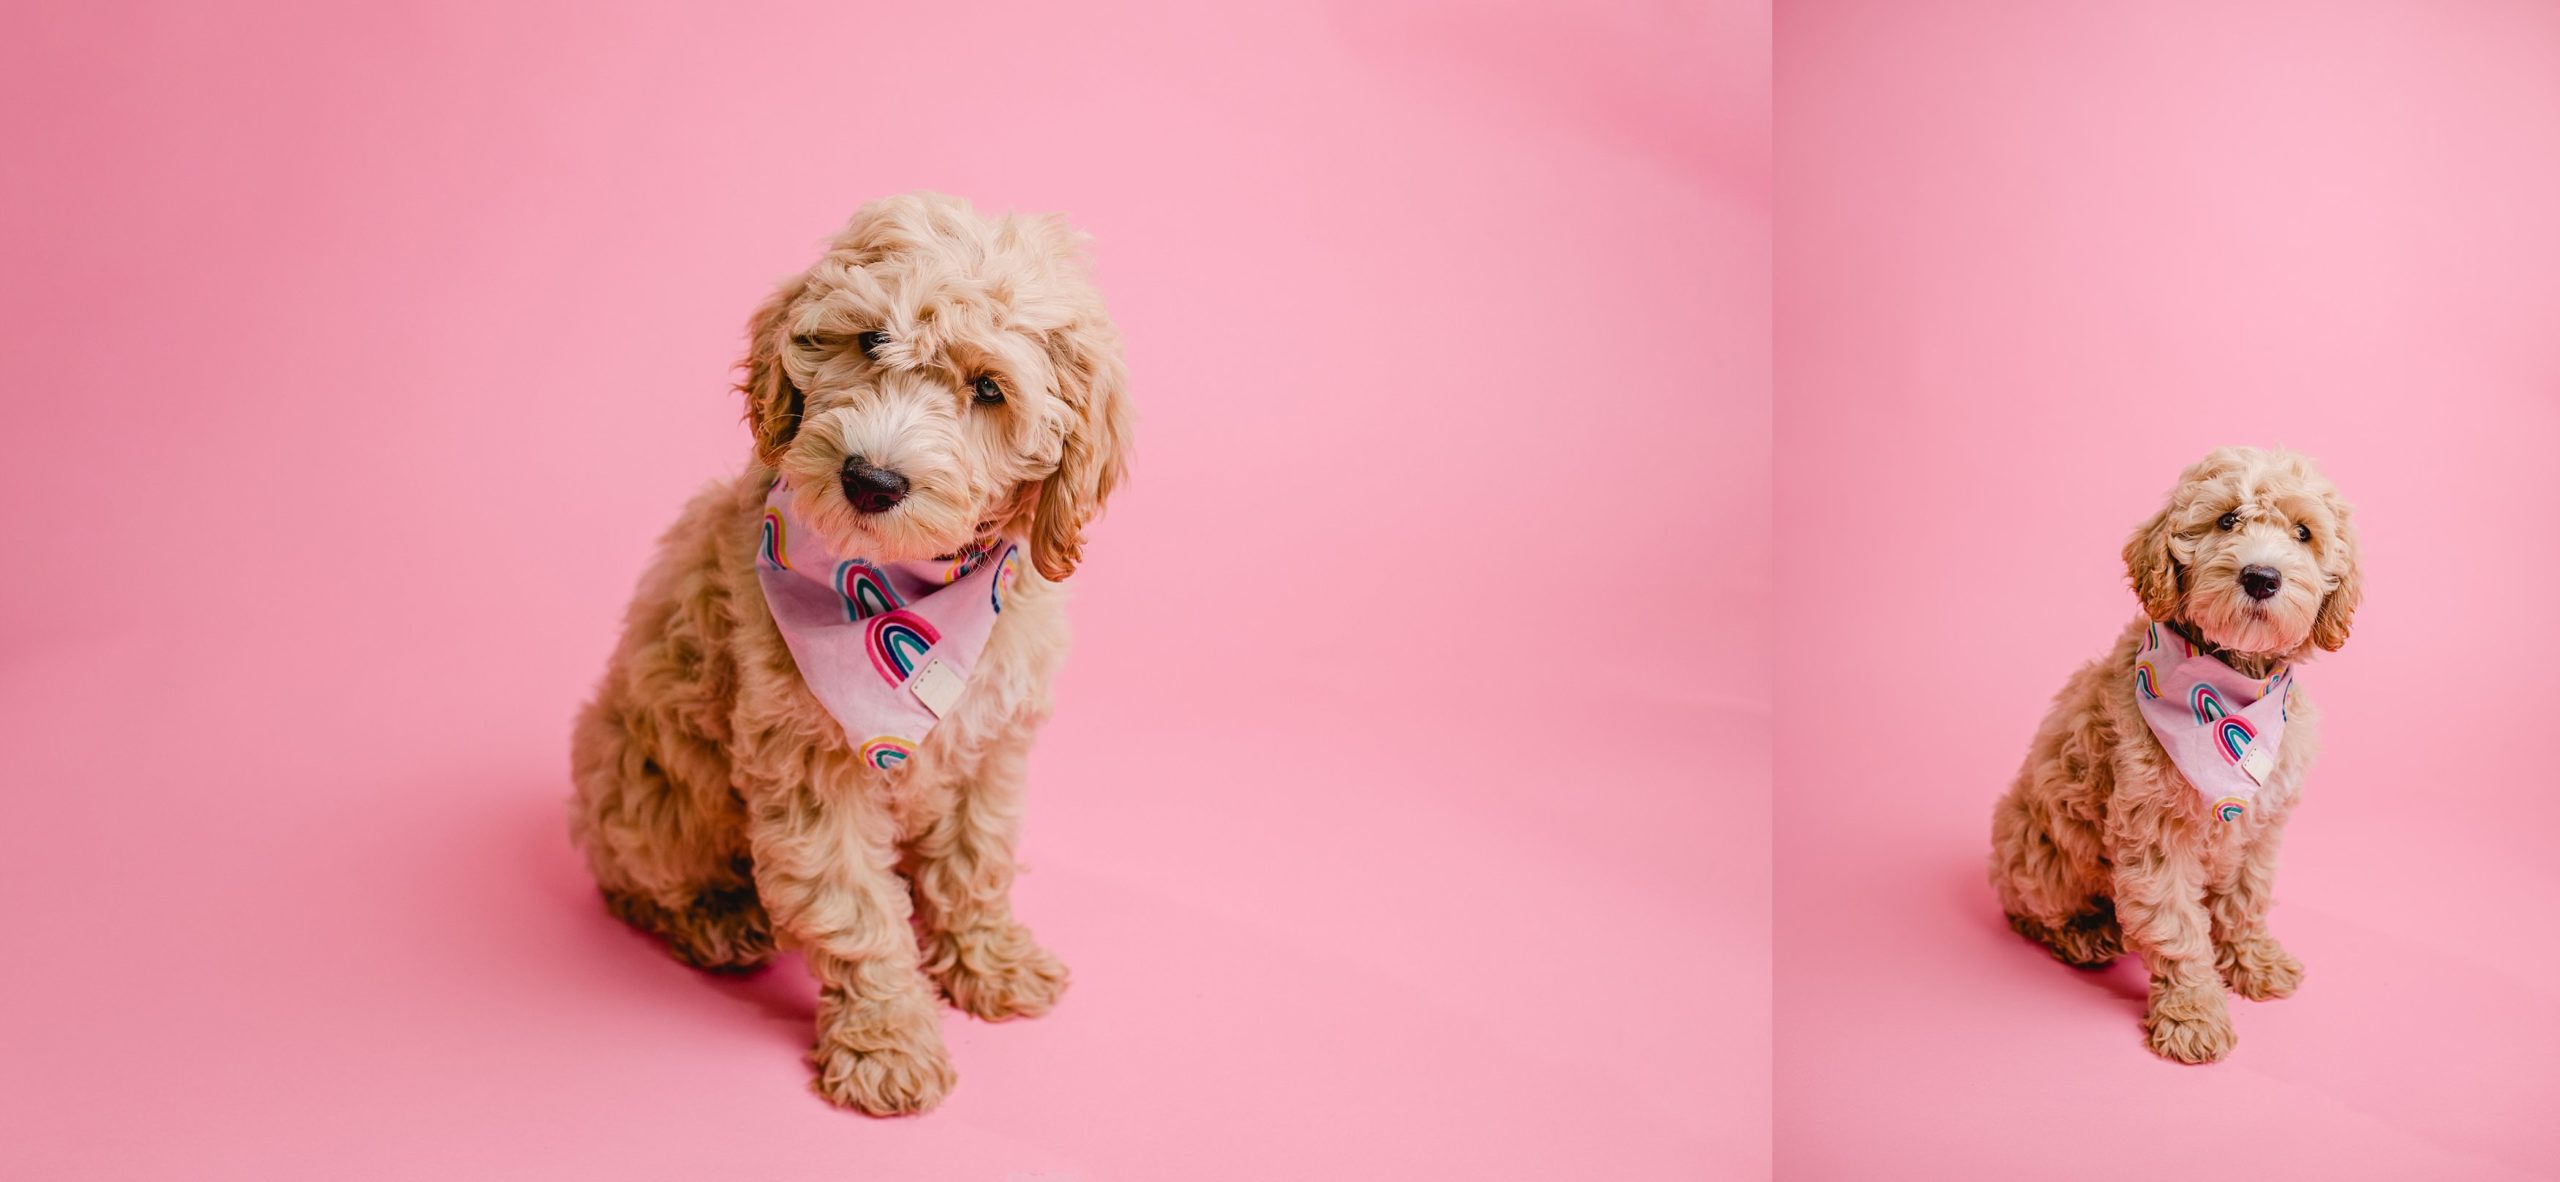 Cute puppy photography in studio on pink seamless backdrop.